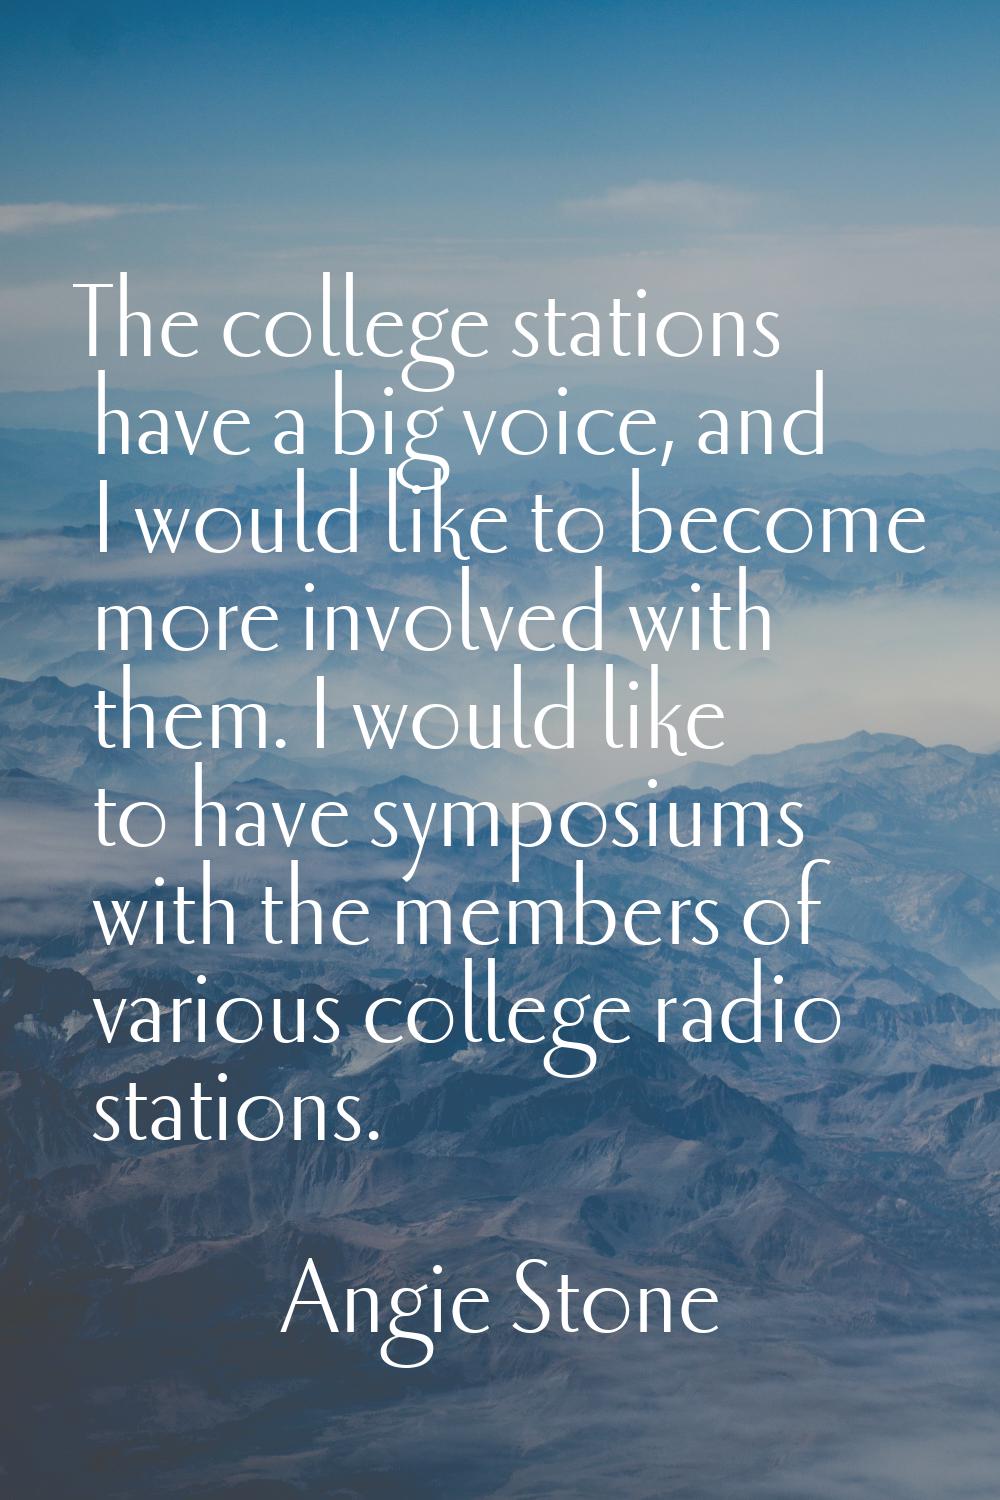 The college stations have a big voice, and I would like to become more involved with them. I would 